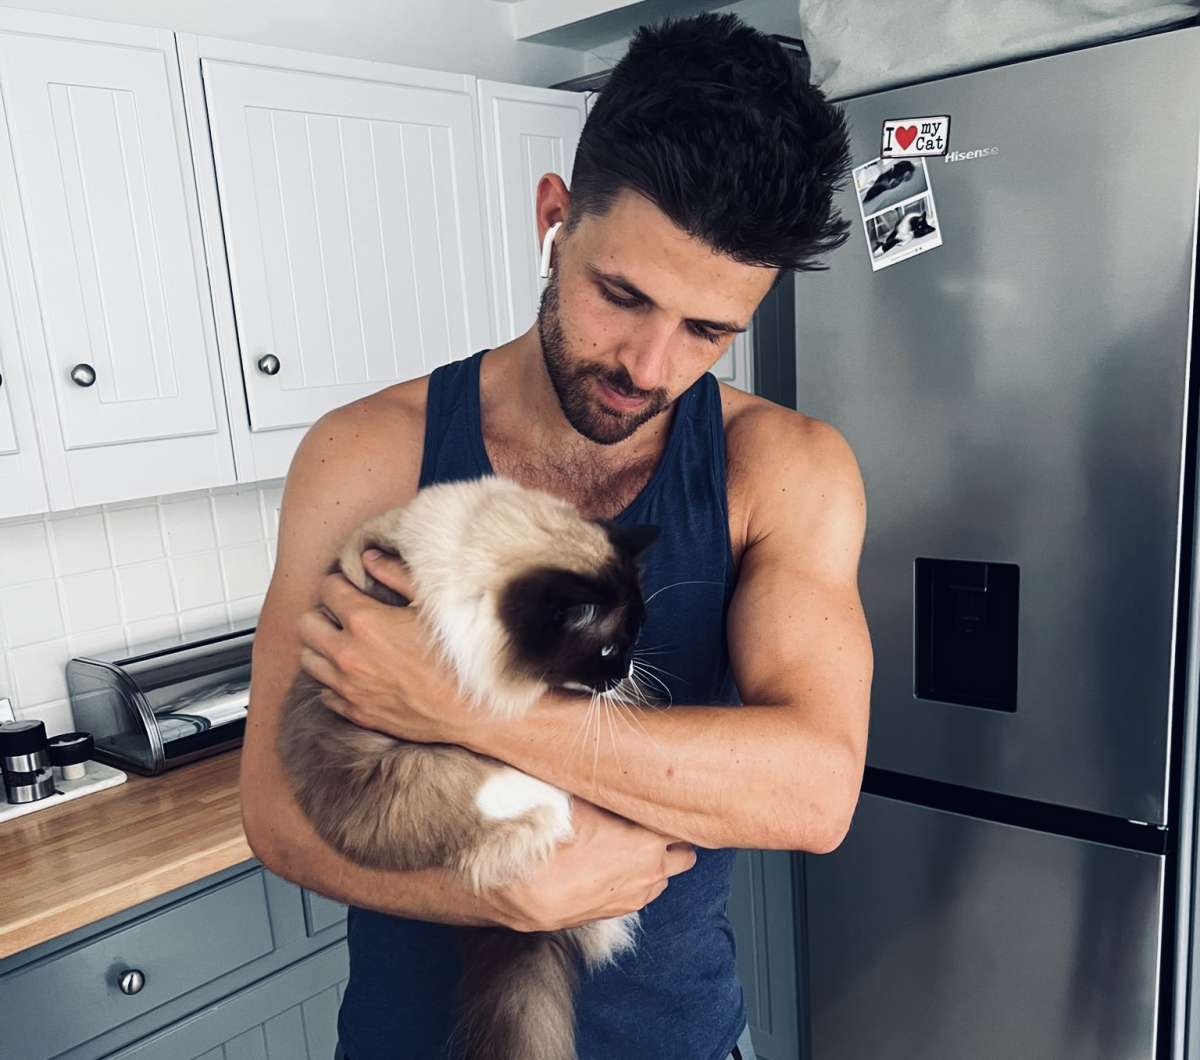 A tender moment between a man and his cat in a modern kitchen, depicting the intimate domestic life within the Gay London community.